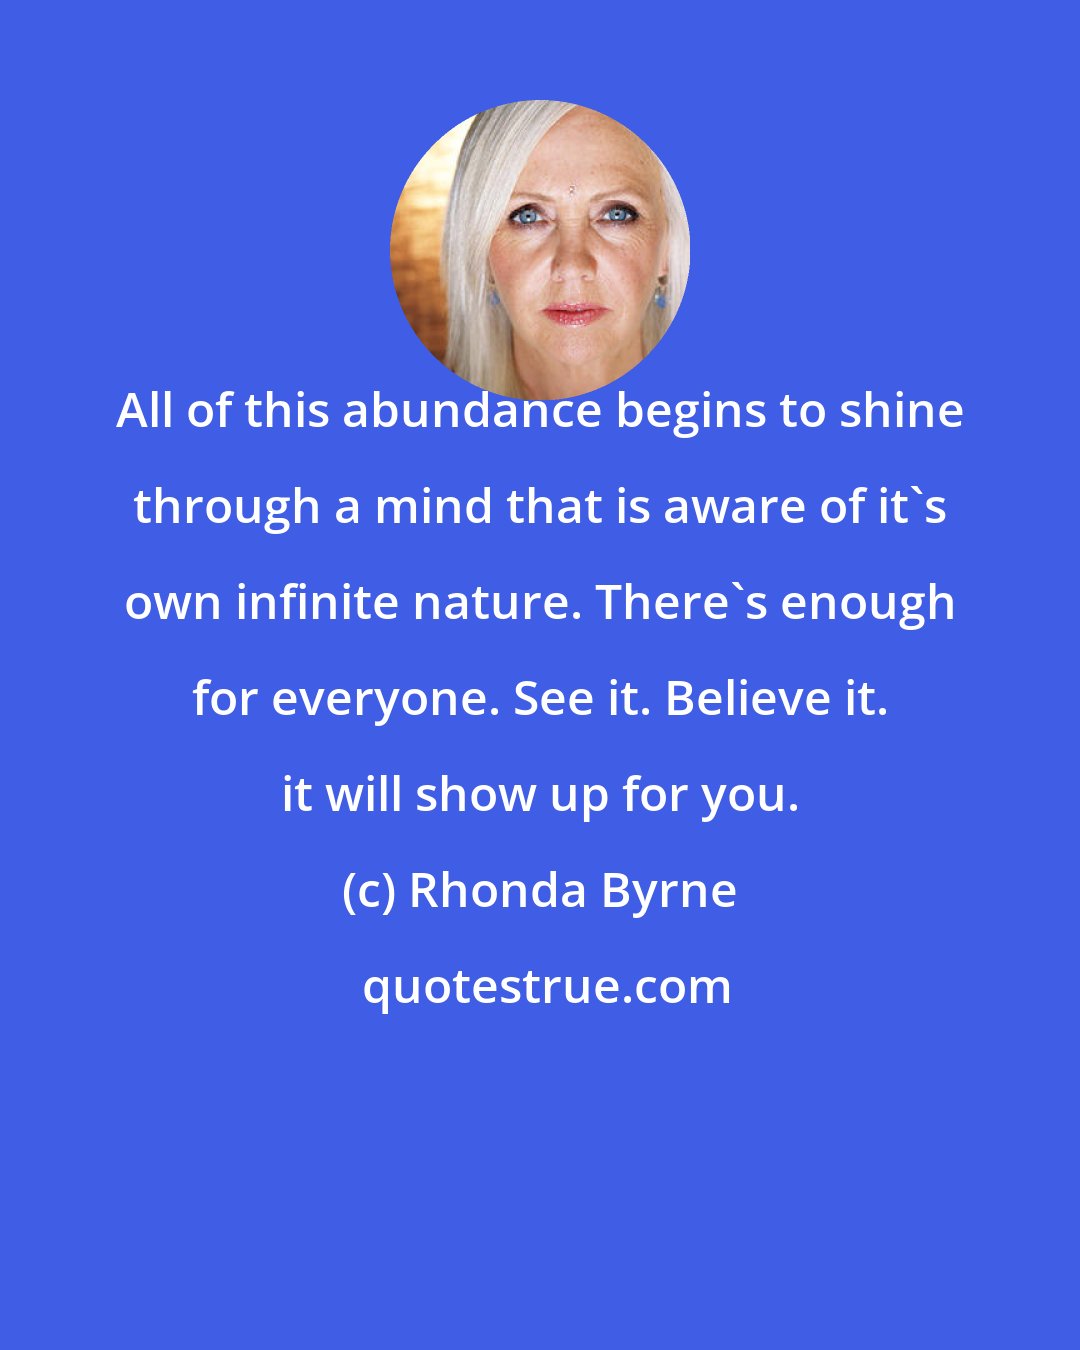 Rhonda Byrne: All of this abundance begins to shine through a mind that is aware of it's own infinite nature. There's enough for everyone. See it. Believe it. it will show up for you.